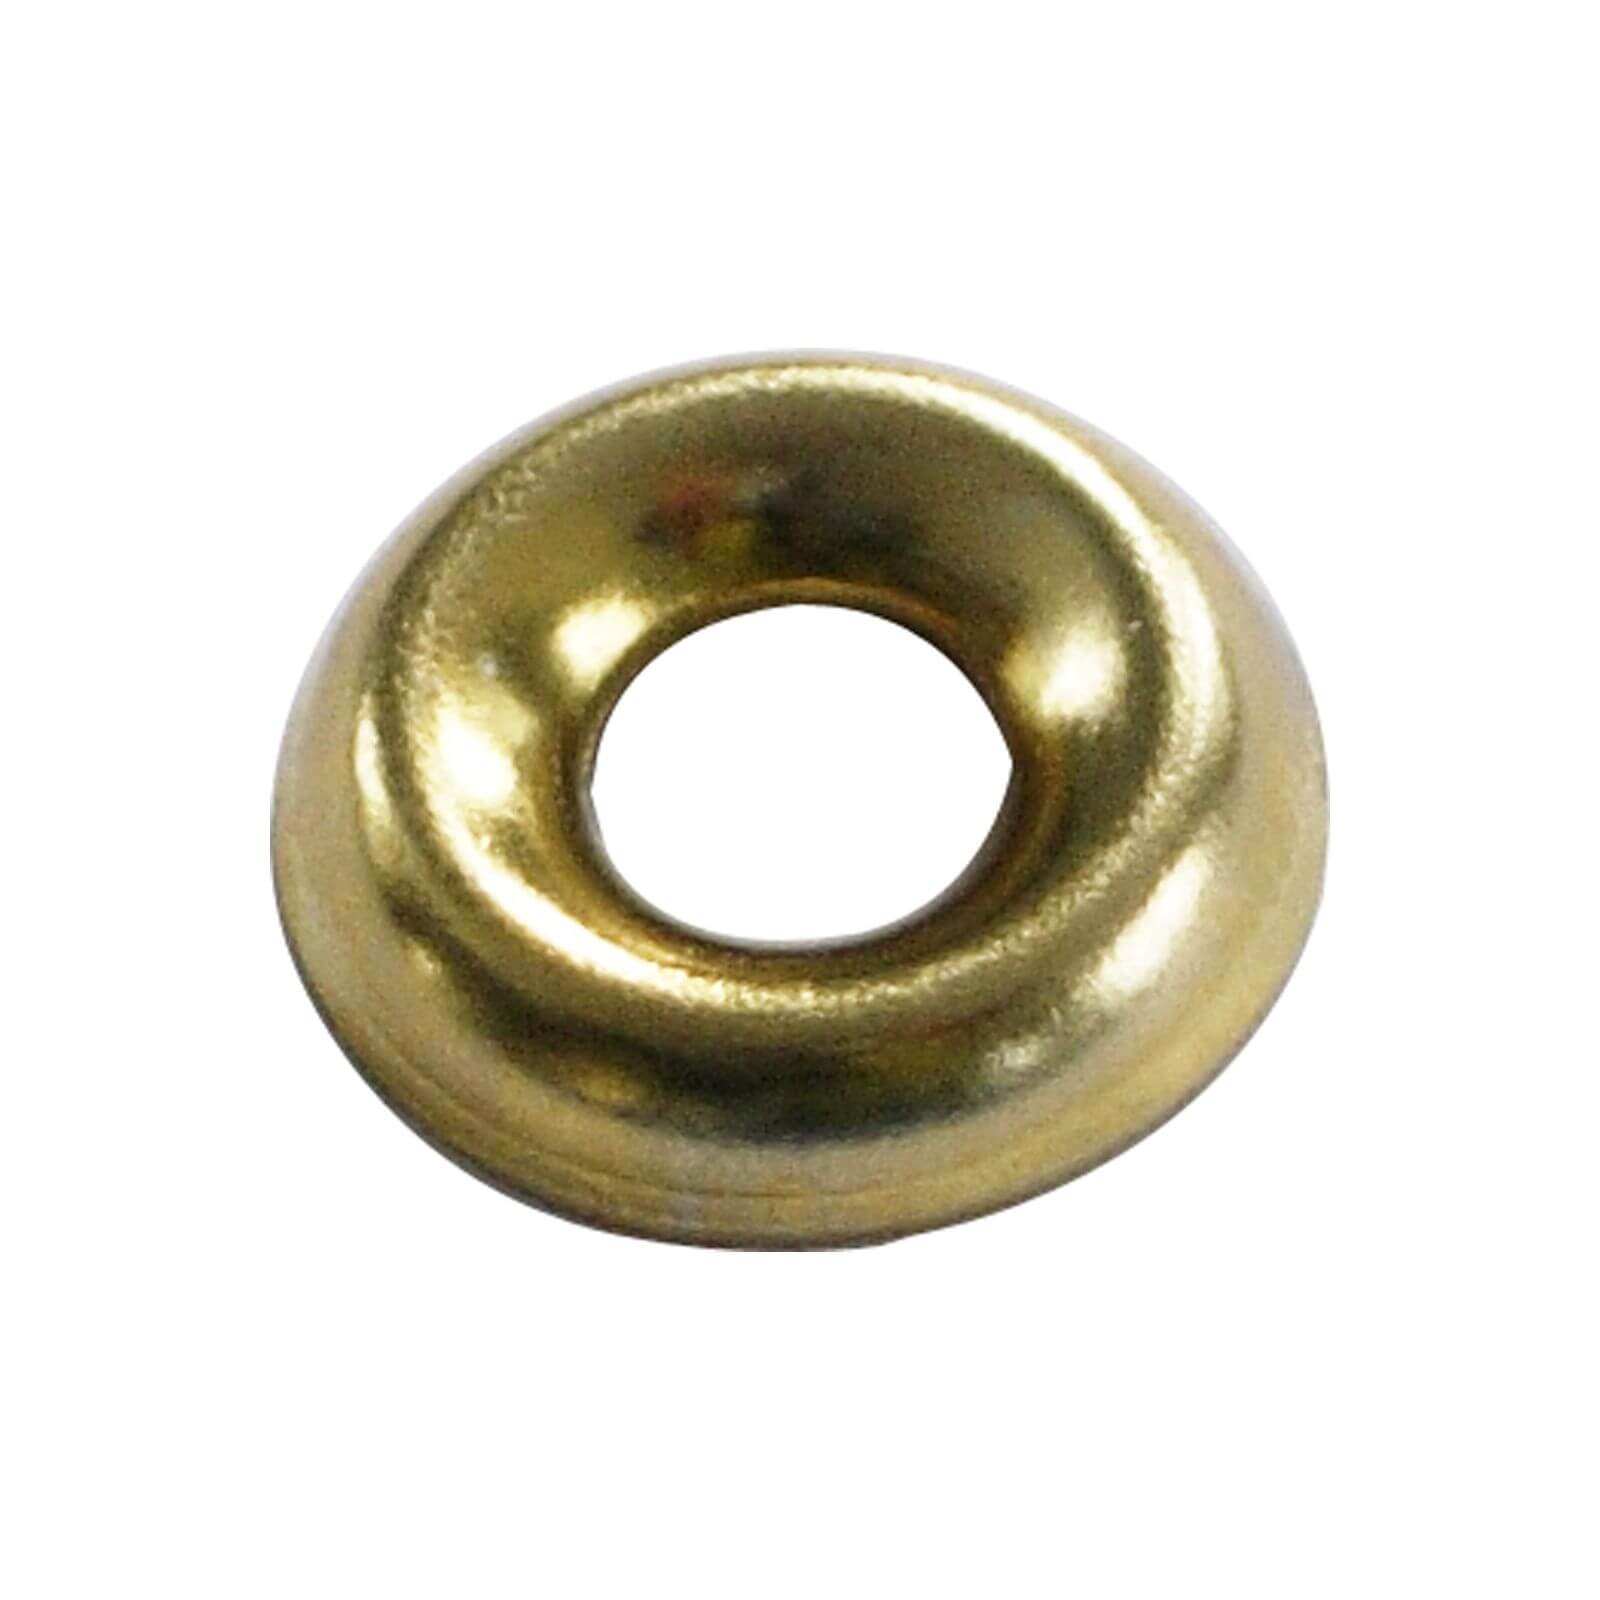 Screw Cup Washer - Brass Plated- 5mm - 20 Pack